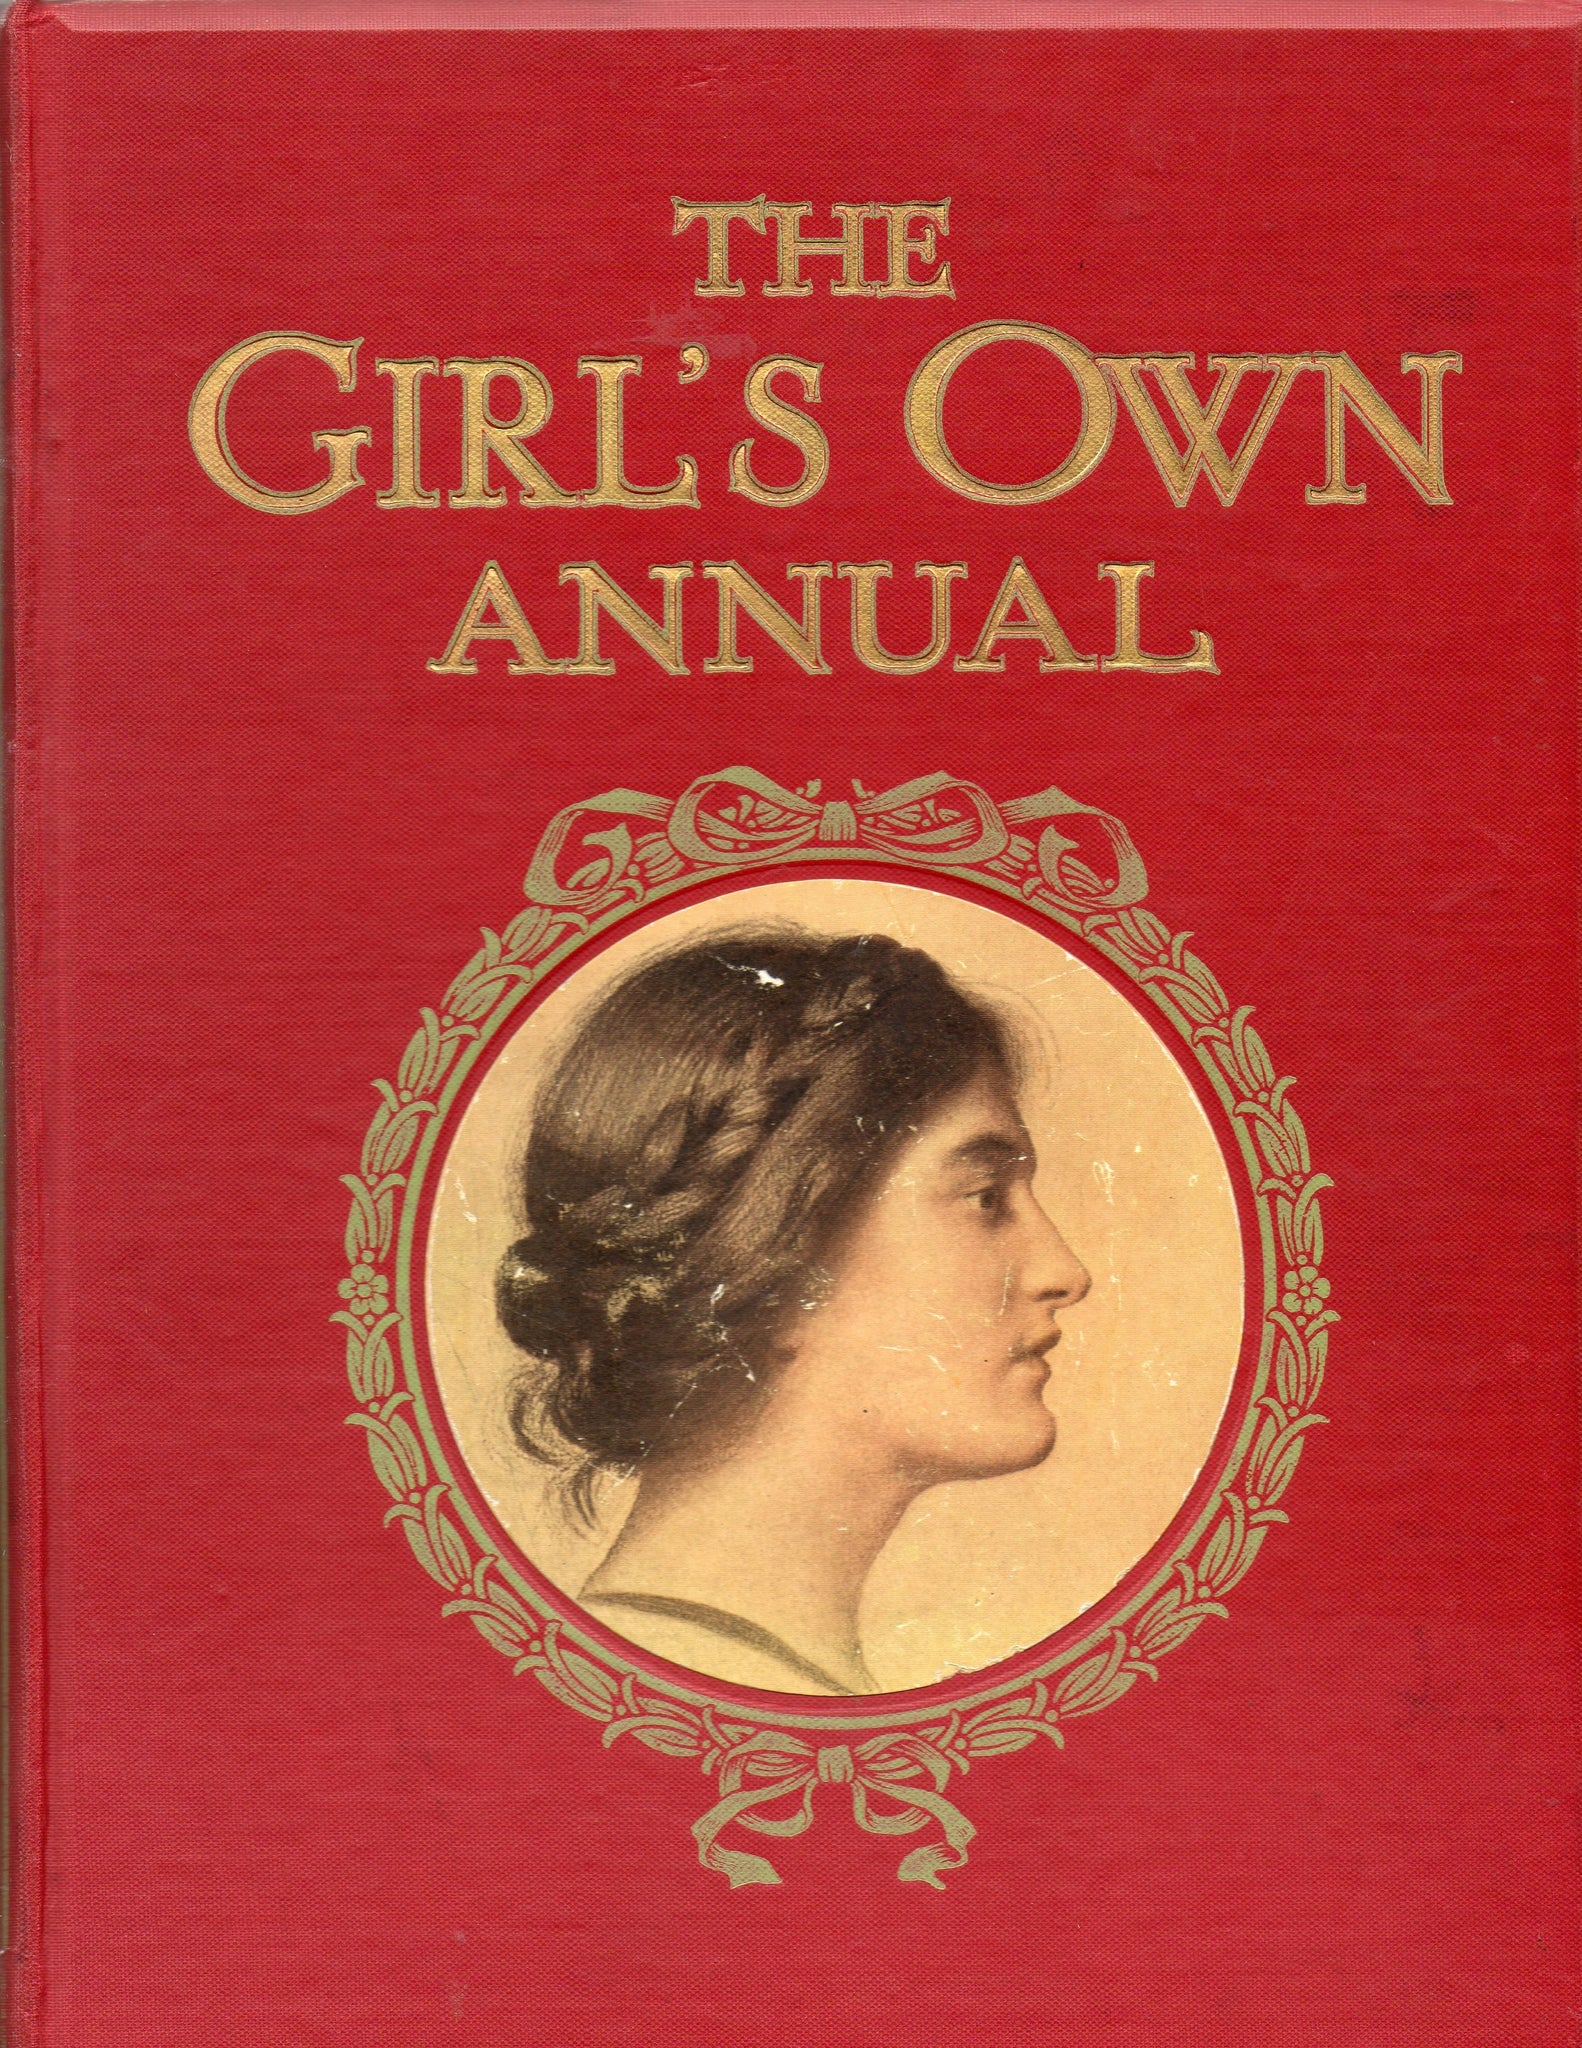 The Girl's Own Annual